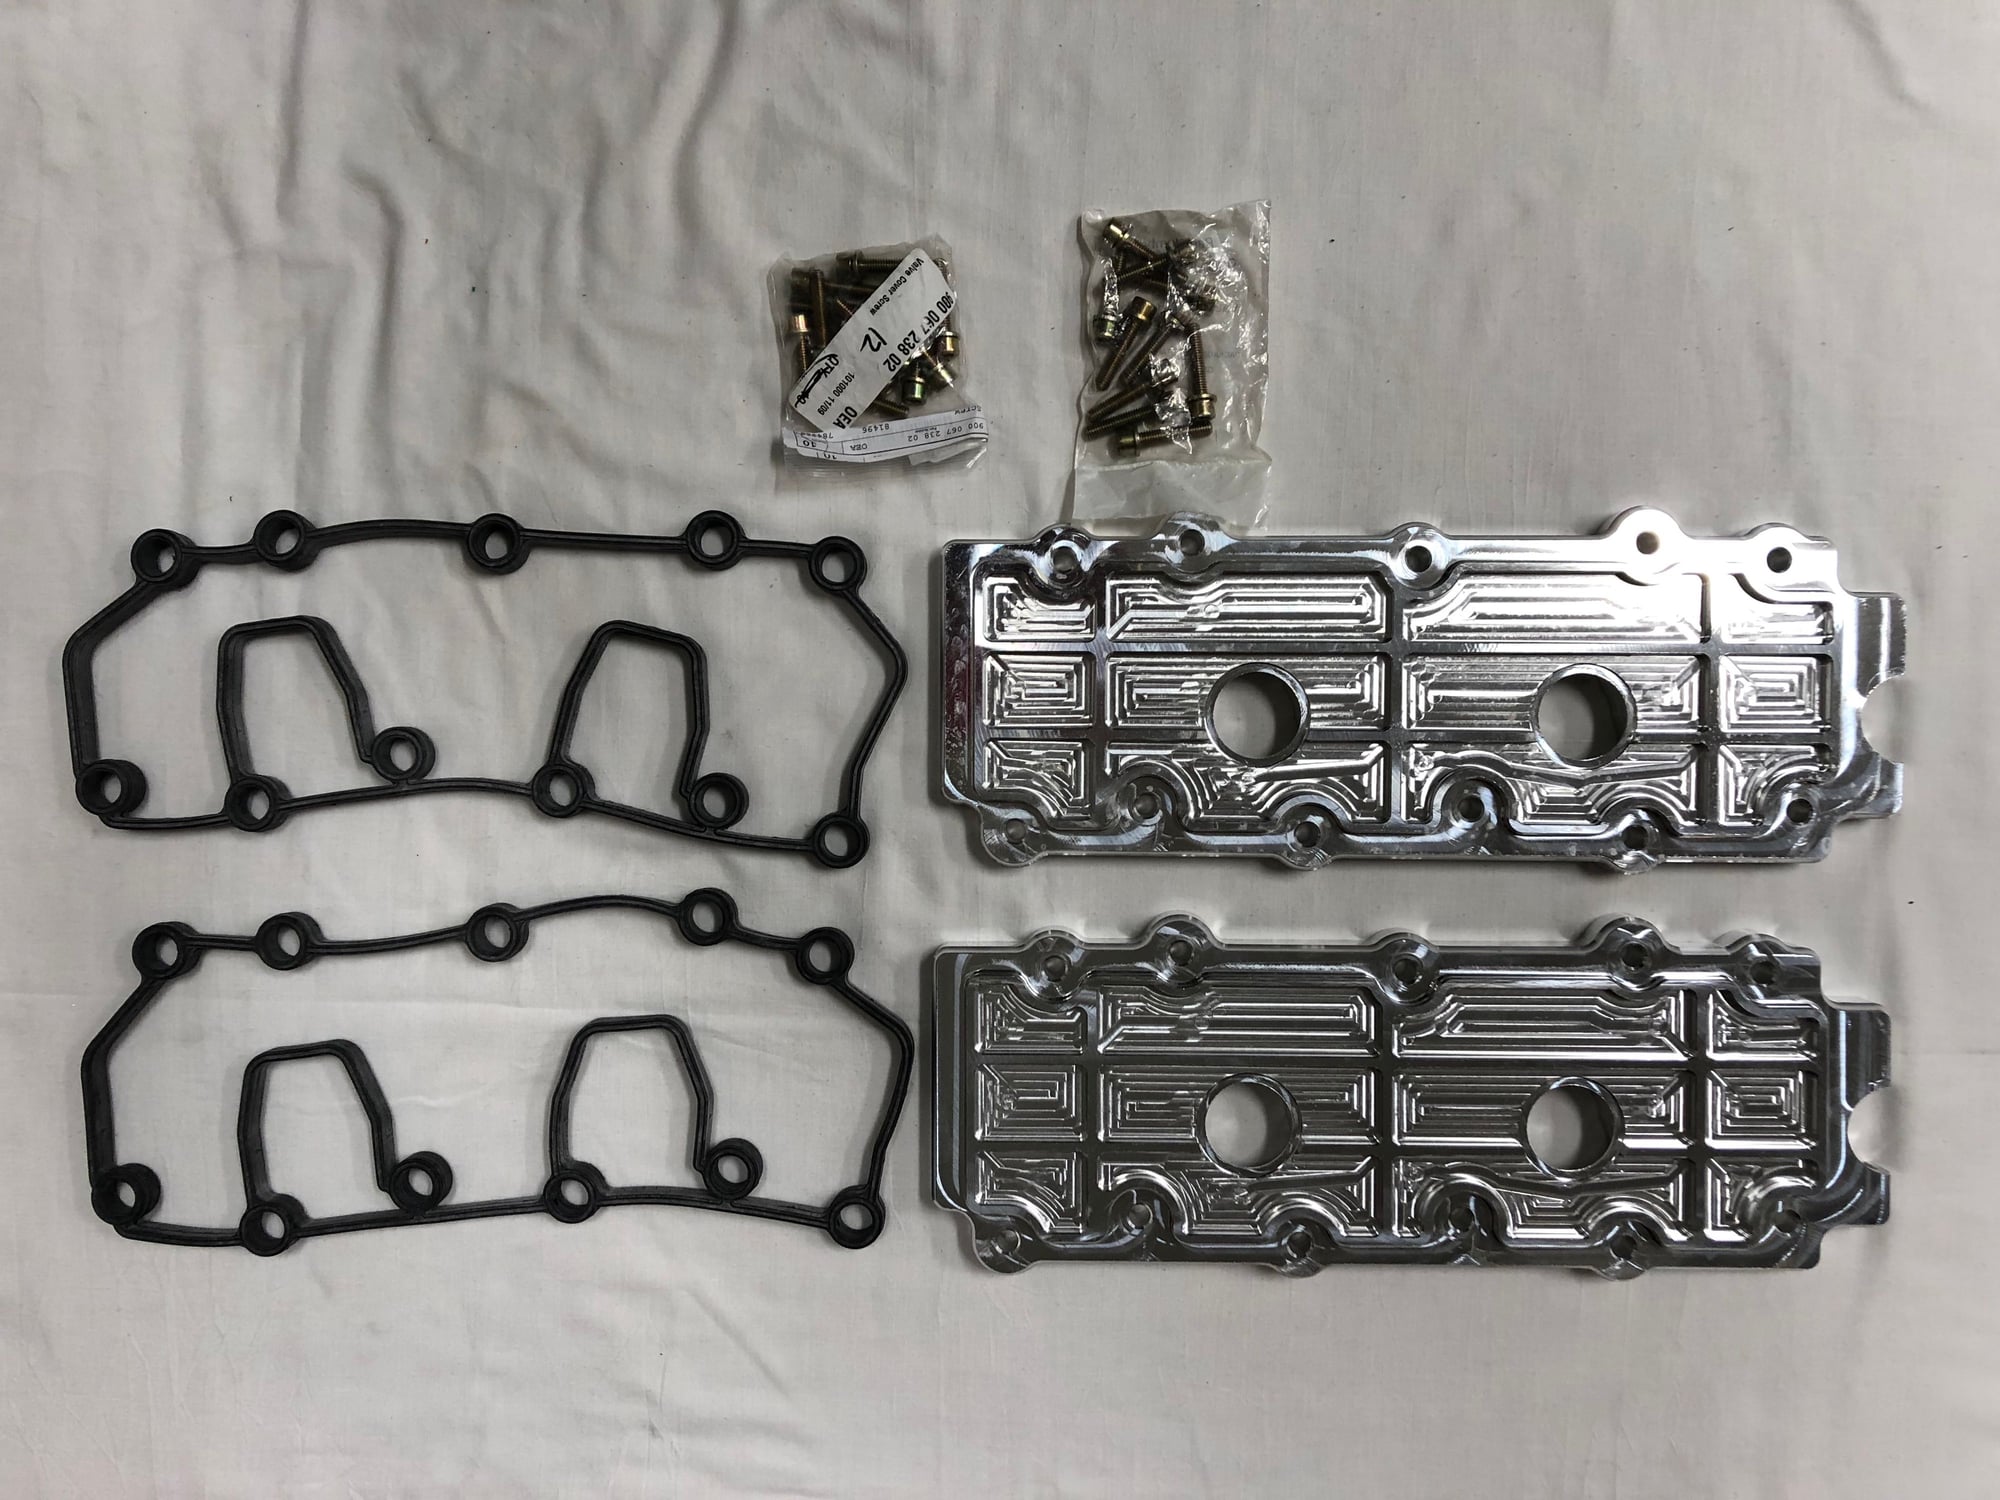 Miscellaneous - Hargett Precision billet aluminum 993 valve covers (lowers) with gaskets and hardware - New - 1995 to 1998 Porsche Carrera - Trabuco Canyon, CA 92679, United States